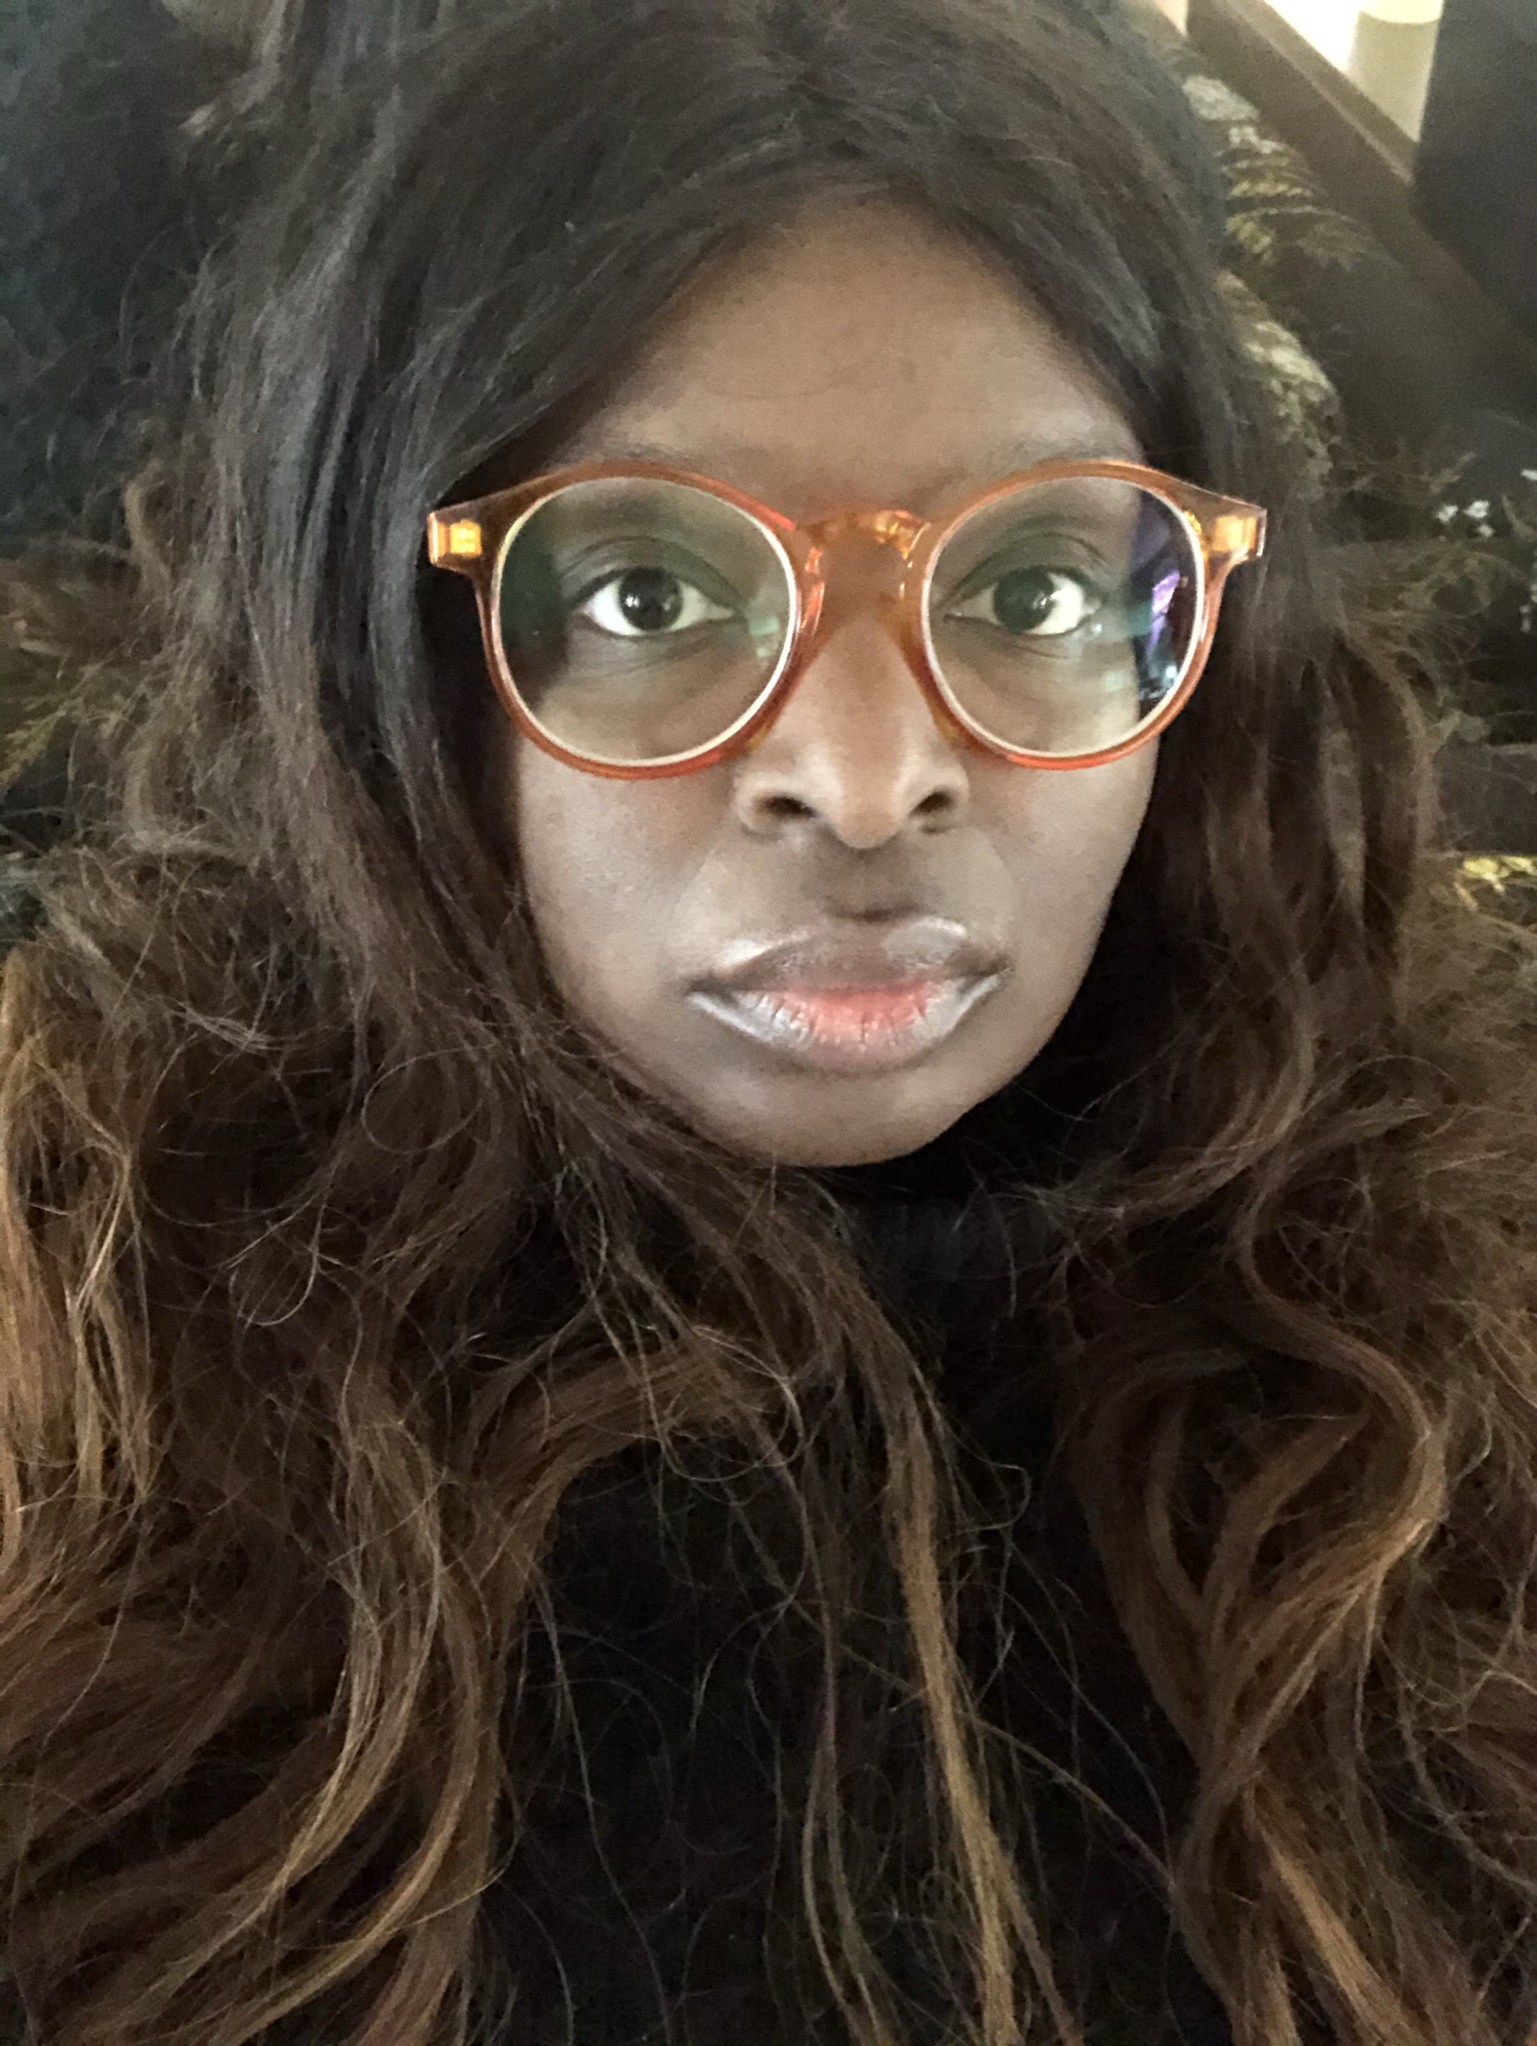 Beautiful Black woman with ombre hair, wears a black turtleneck and yellow glasses, while looking into the camera straight-on. Self-portrait